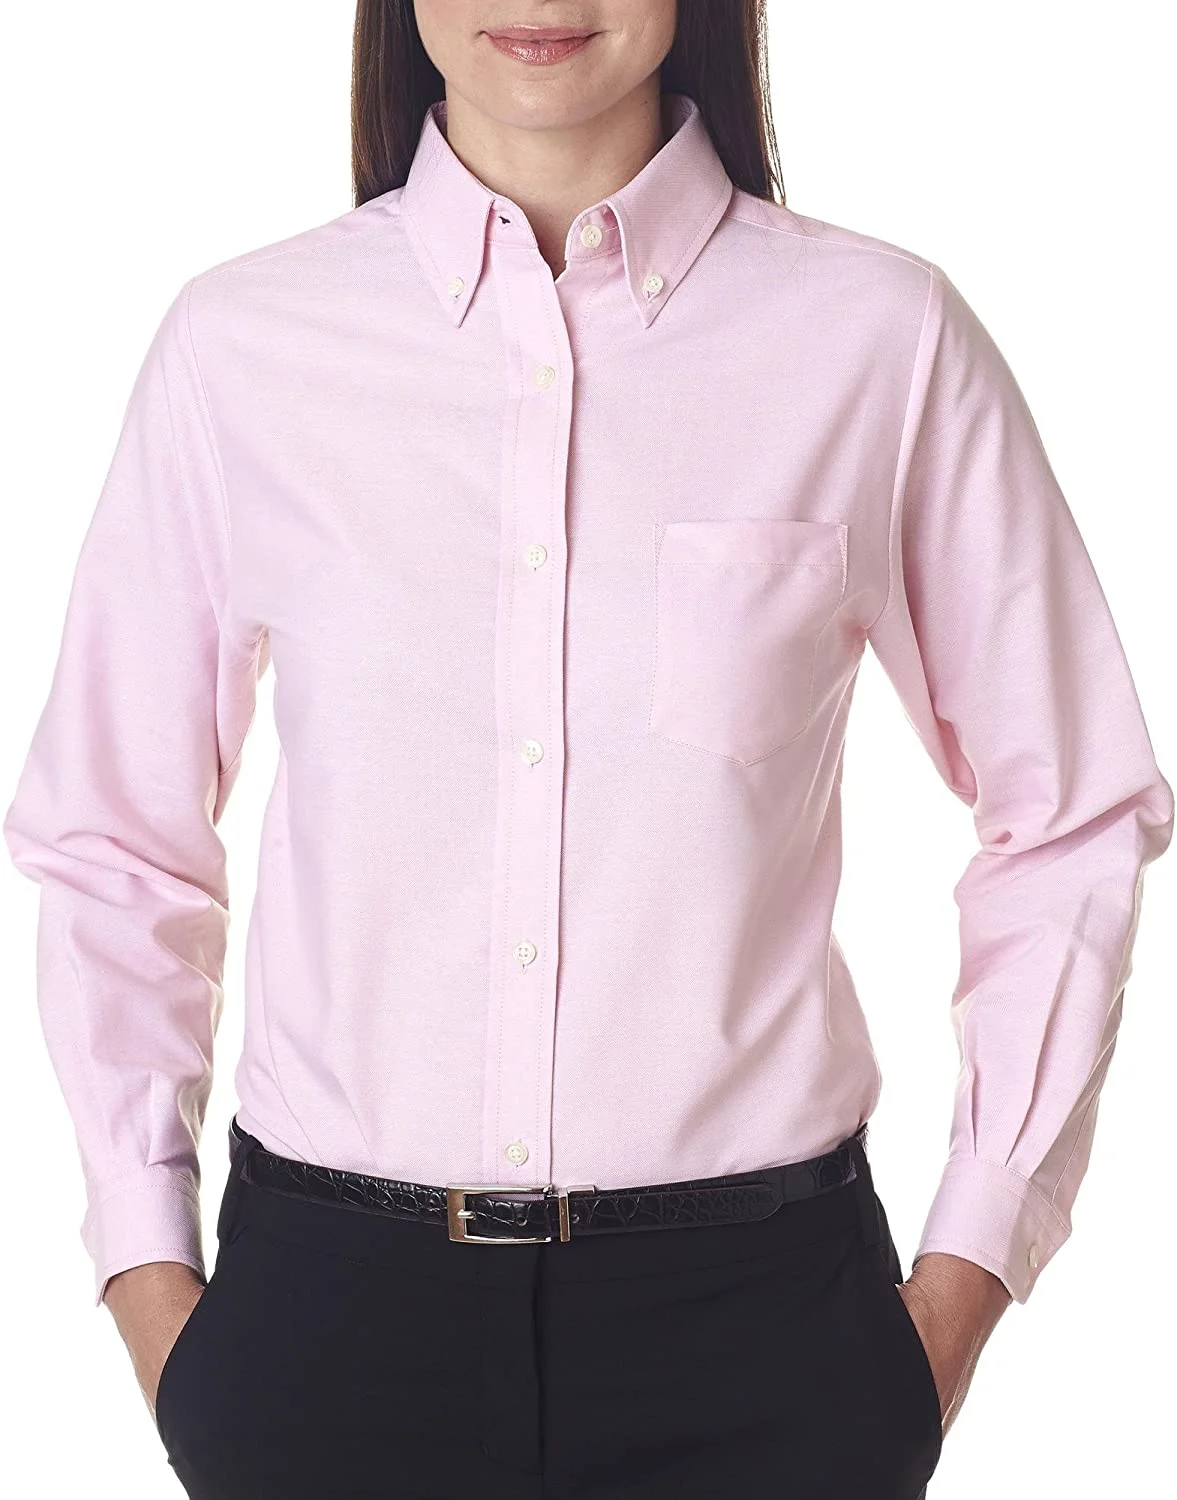 Wholesale Womens Wrinkle Free Long Sleeve Oxford Shirt Manufacturers In Bangladesh Factory Supplier